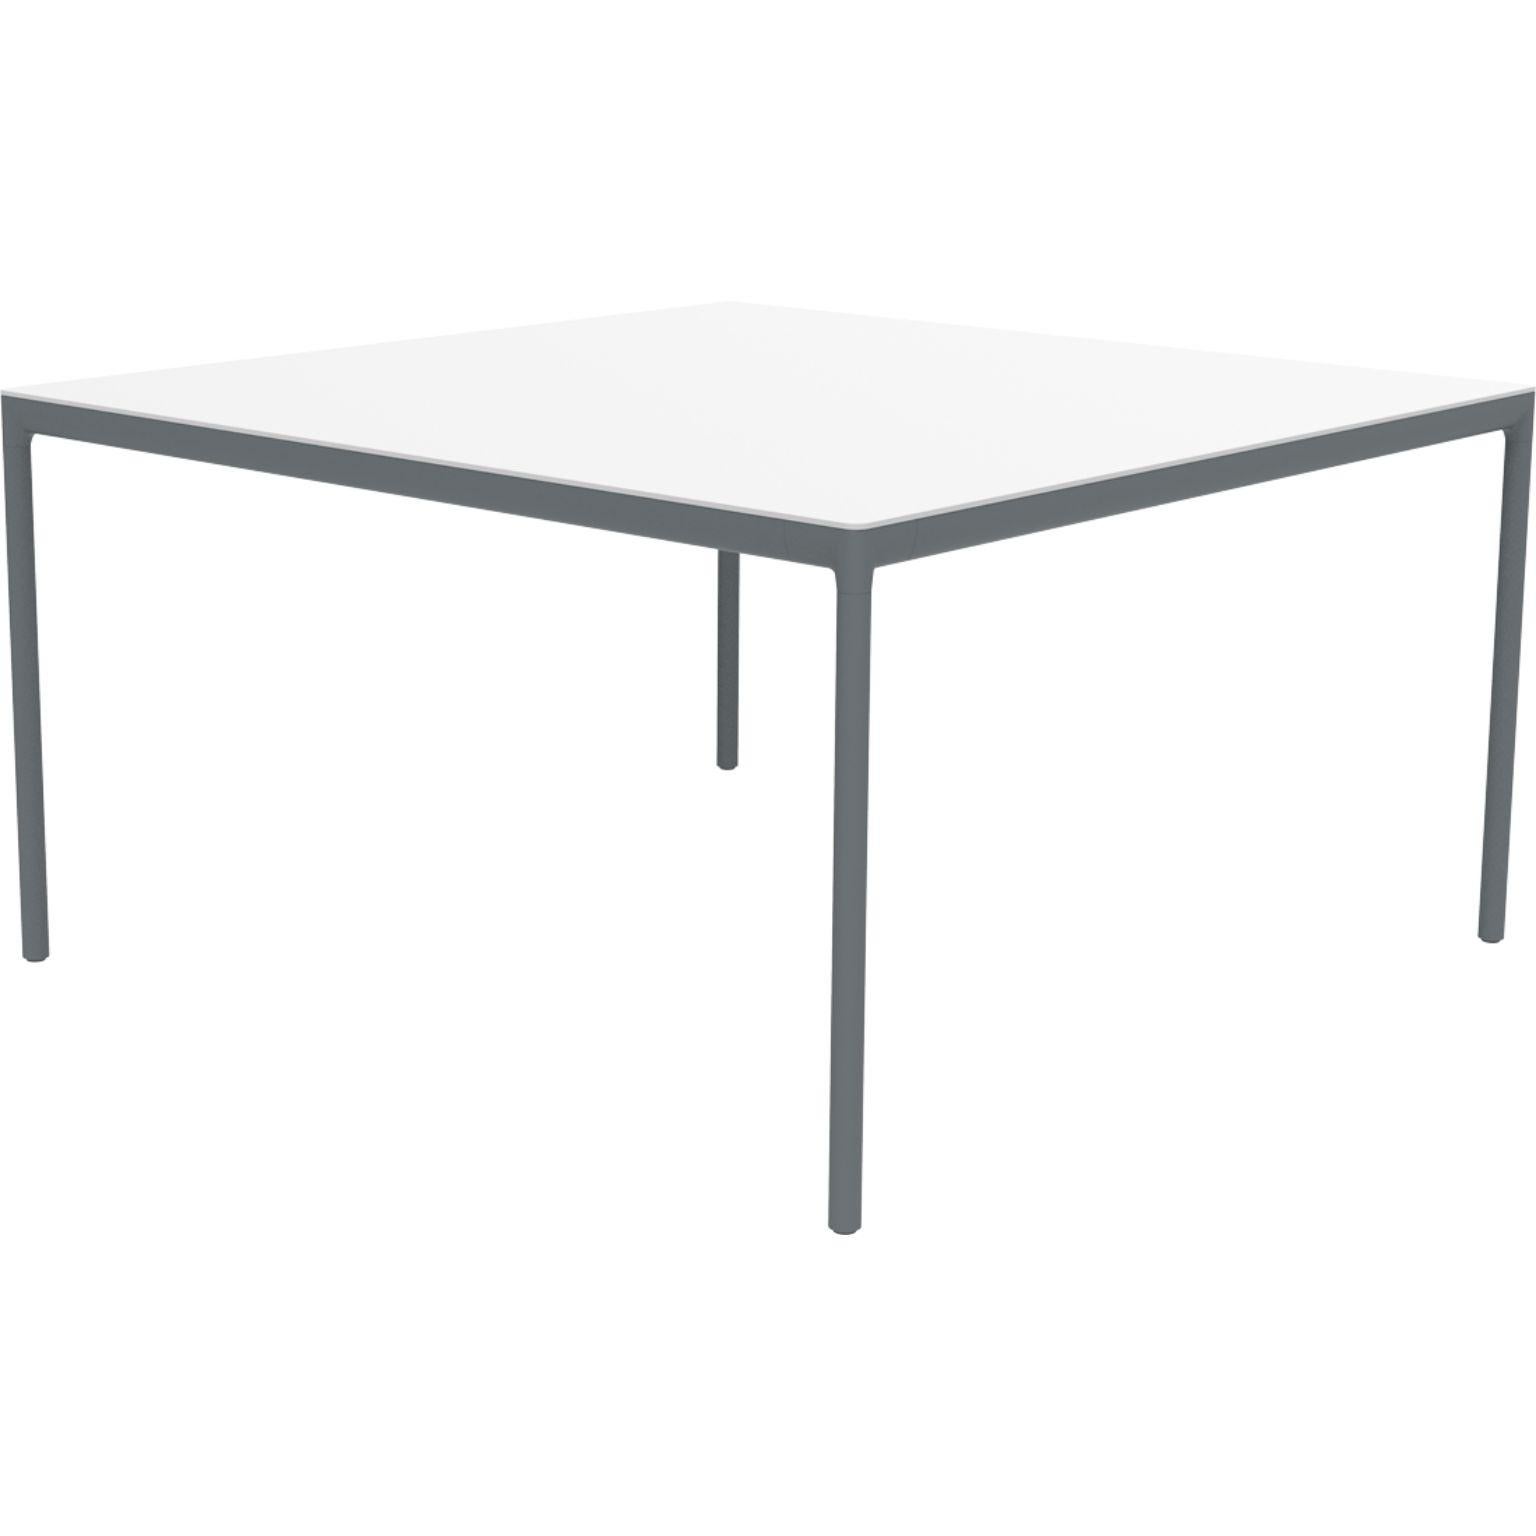 Ribbons grey 138 coffee table by MOWEE
Dimensions: D138 x W138 x H75 cm.
Material: Aluminum and HPL top.
Weight: 23 kg.
Also available in different colors and finishes. (HPL Black Edge or Neolith top).

An unmistakable collection for its